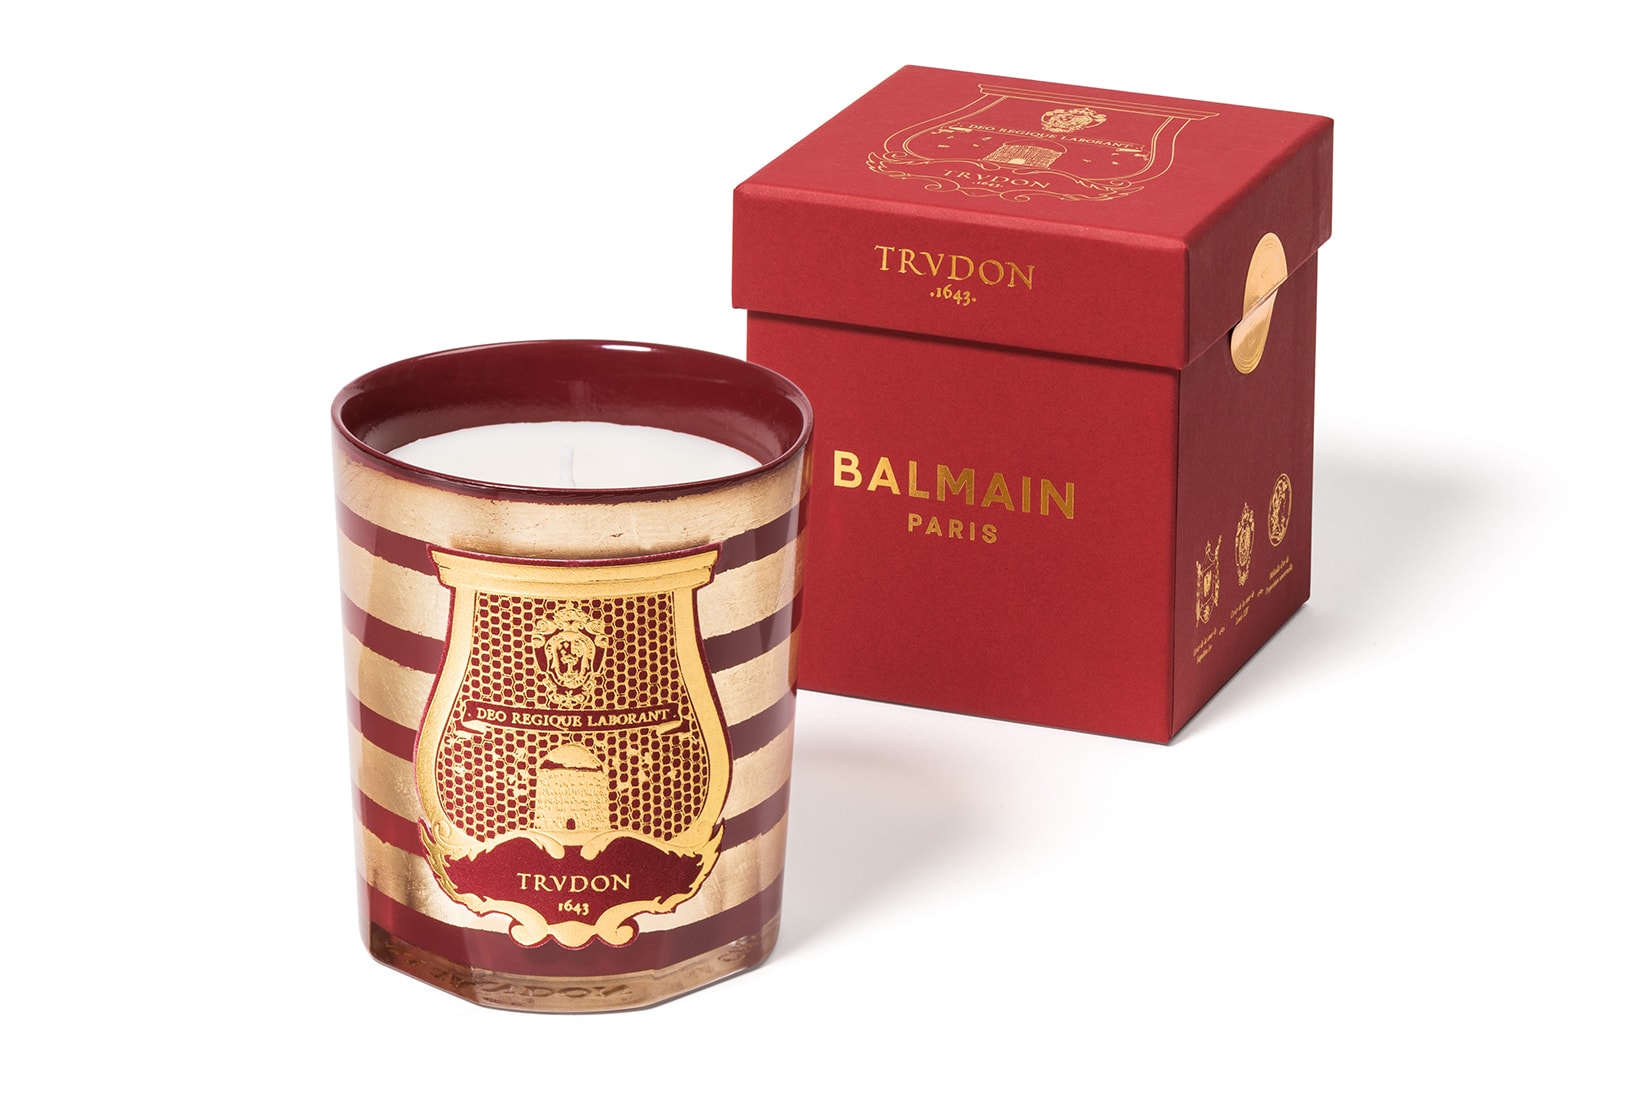 Balmain Trudon Limited Edition Maison Candle Olivier Rousteing Packaging Small